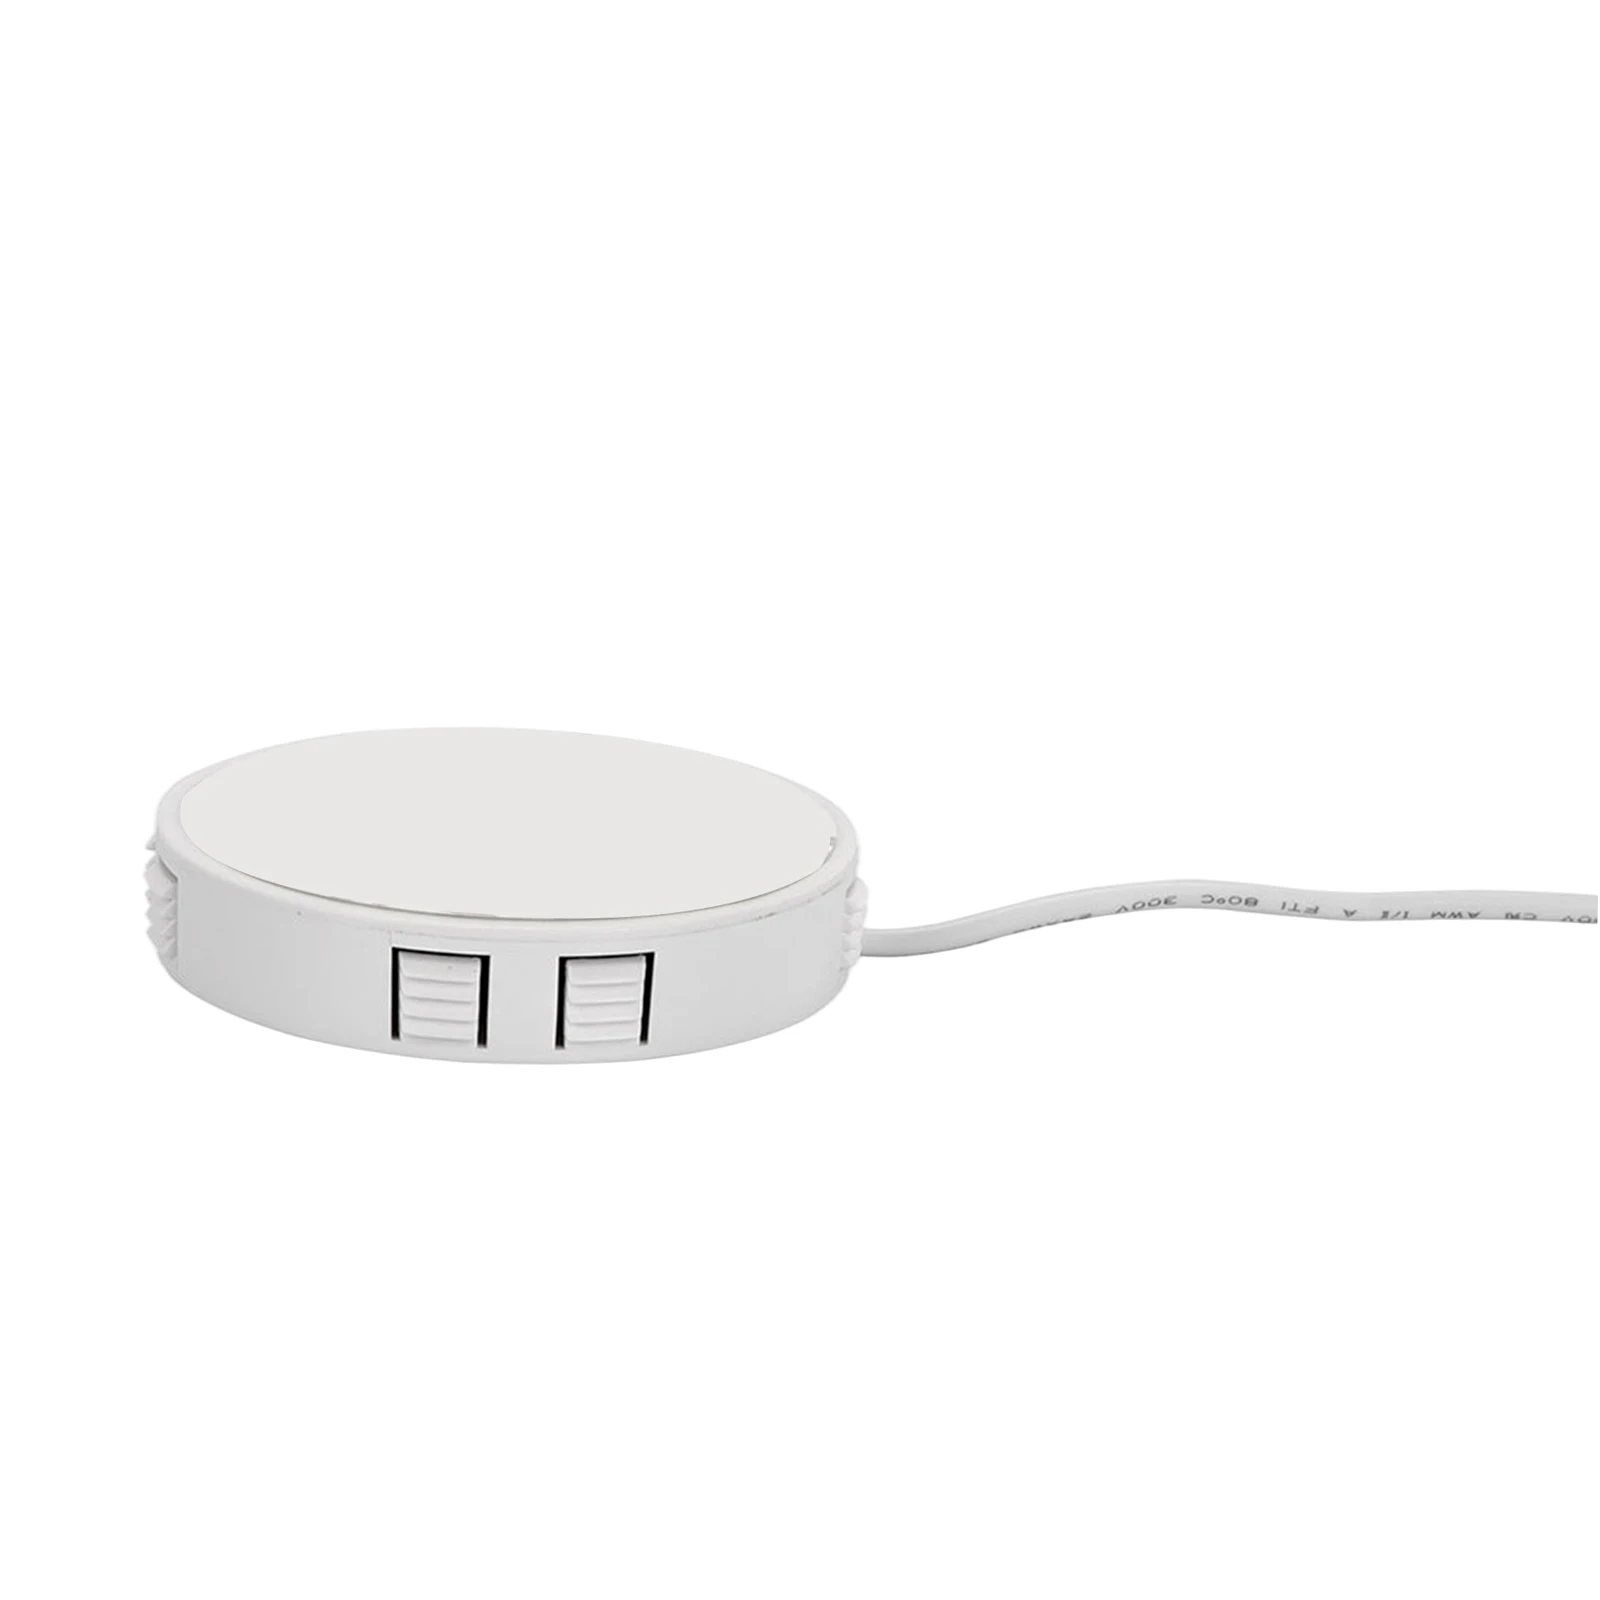 Qi Invisible TWS Embedded Wireless Charger for Cell Phones Restaurant Tables